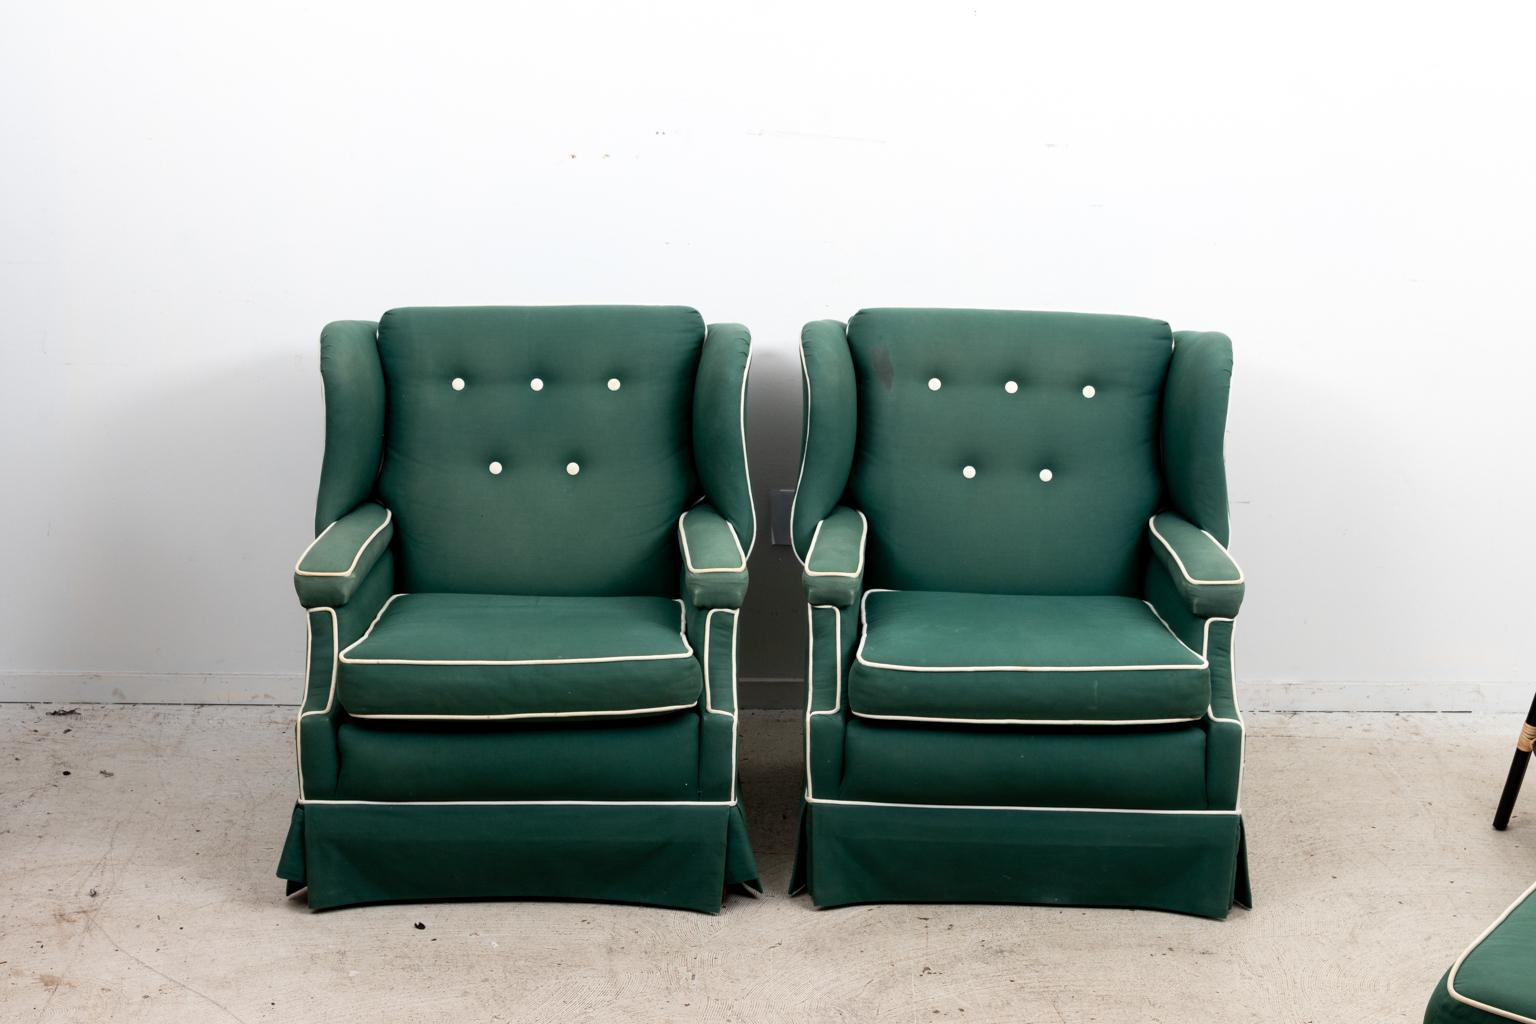 Pair of upholstered wingback club chairs with matching ottoman and white tufted button seat backs. The chairs also feature white chord accent trim. Please note of wear consistent with age.